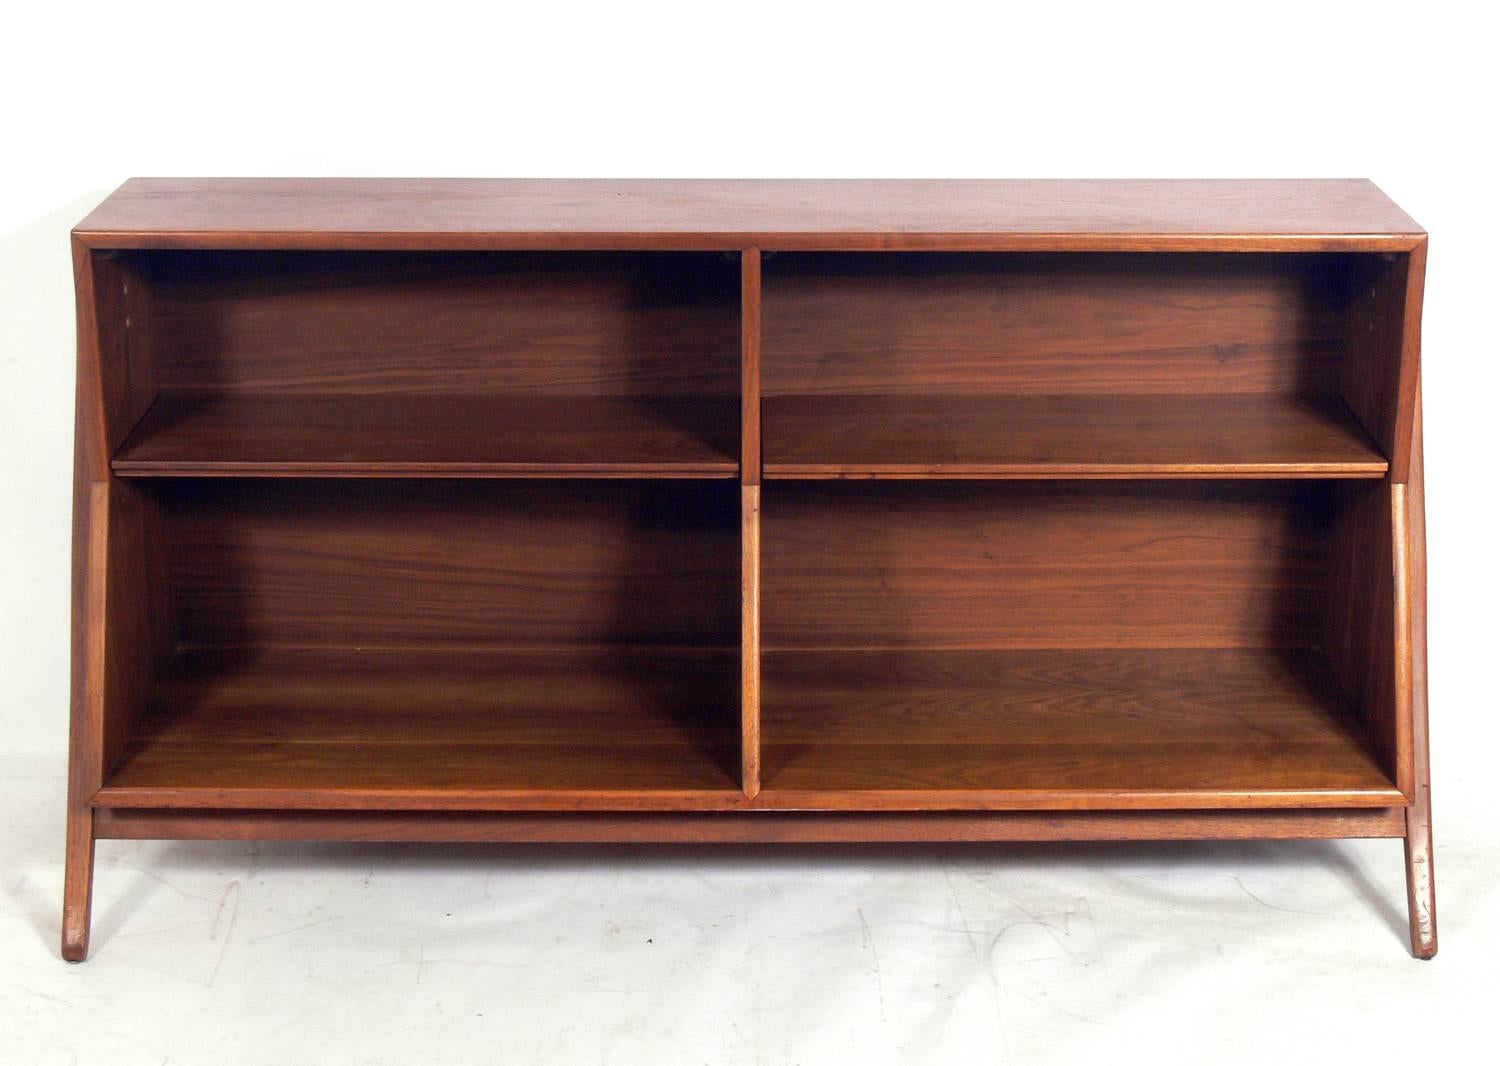 Sculptural bookshelf, designed by Kipp Stewart for Drexel, American, circa 1960s. This piece has a Danish Modern style with elegantly flared legs. It is a versatile size and would work as a bookshelf or bookcase, credenza, vitrine or bar.